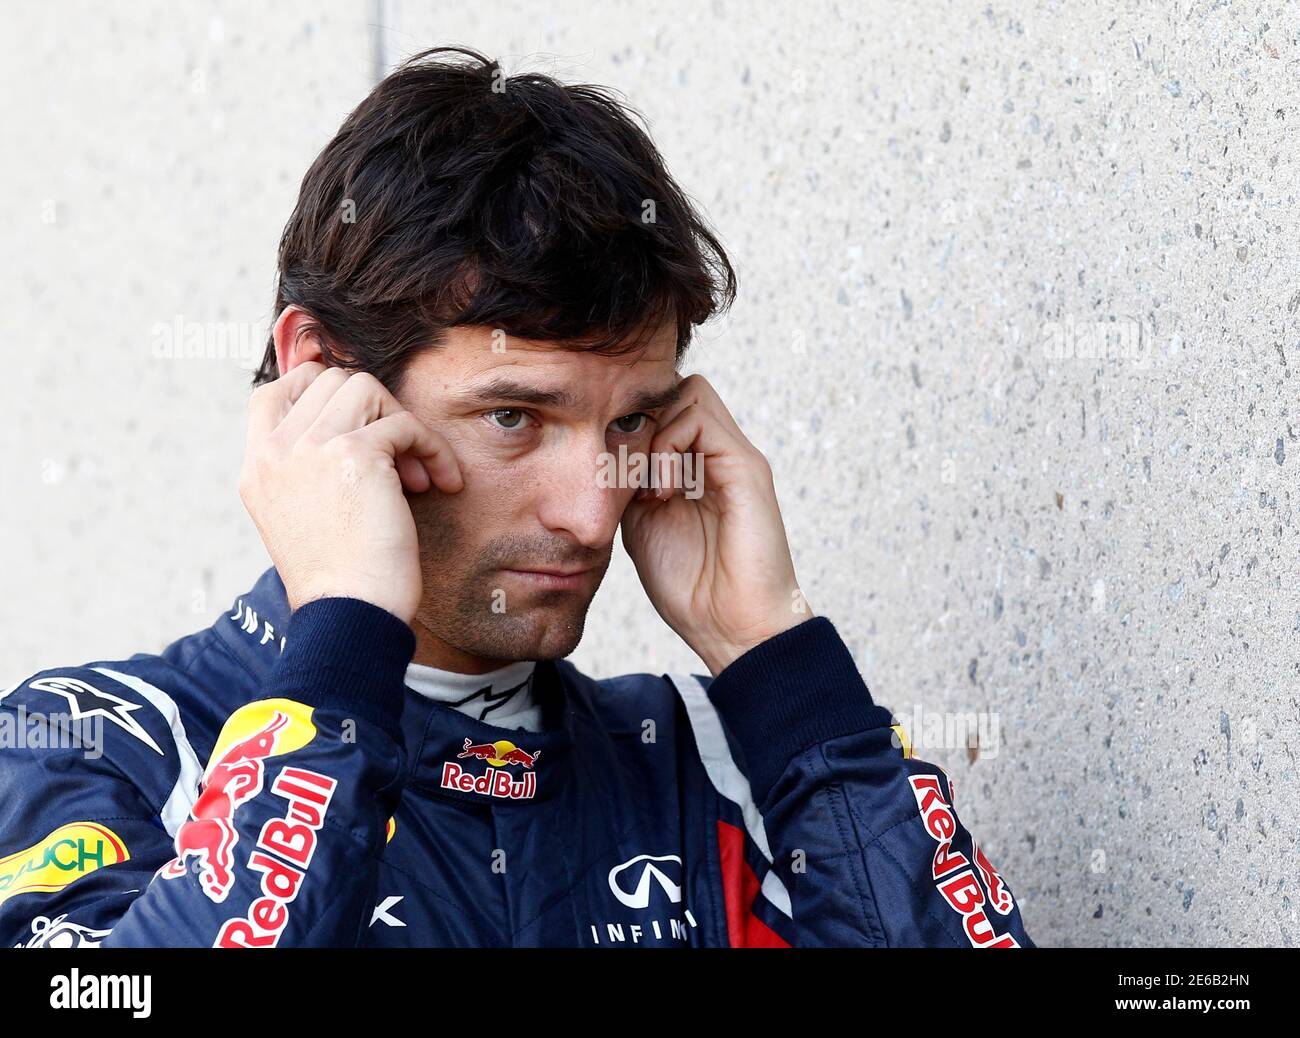 Red Bull Formula One driver Mark Webber of Australia waits for the first practice session of the Canadian F1 Grand Prix at the Circuit Gilles Villeneuve in Montreal June 10, 2011.  REUTERS/Chris Wattie (CANADA  - Tags: SPORT MOTOR RACING) Stock Photo